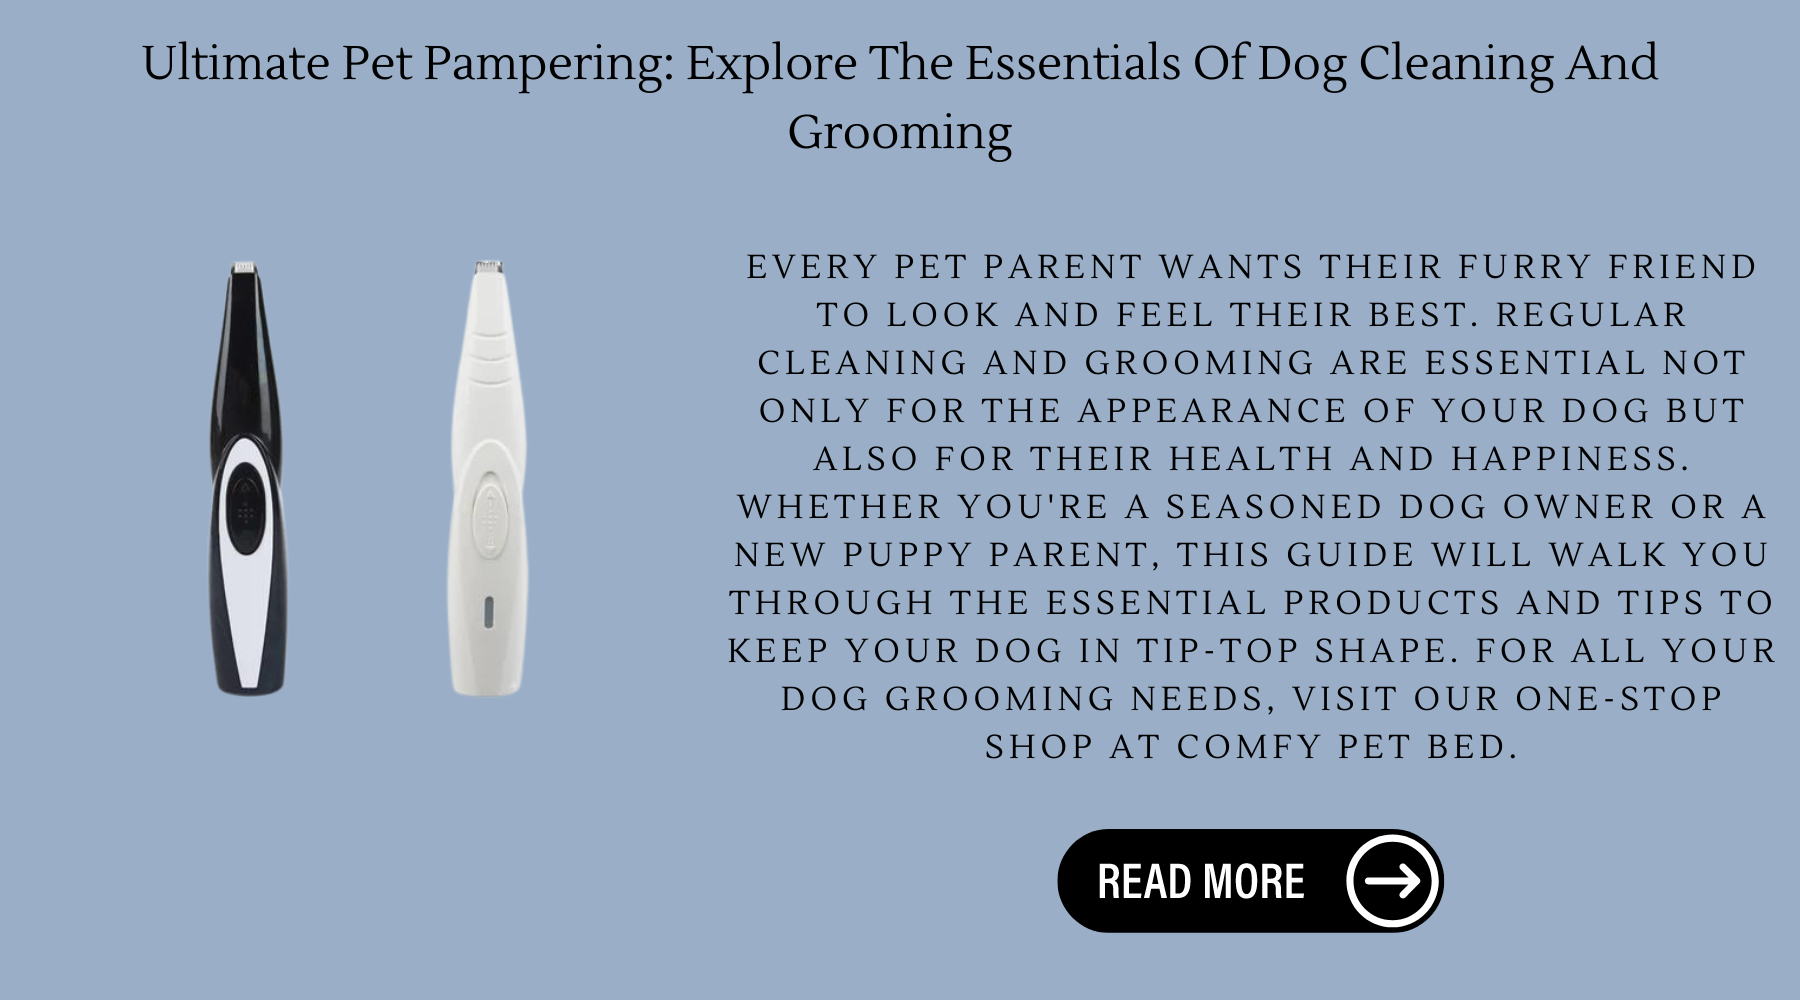 Ultimate Pet Pampering: Explore The Essentials Of Dog Cleaning And Grooming